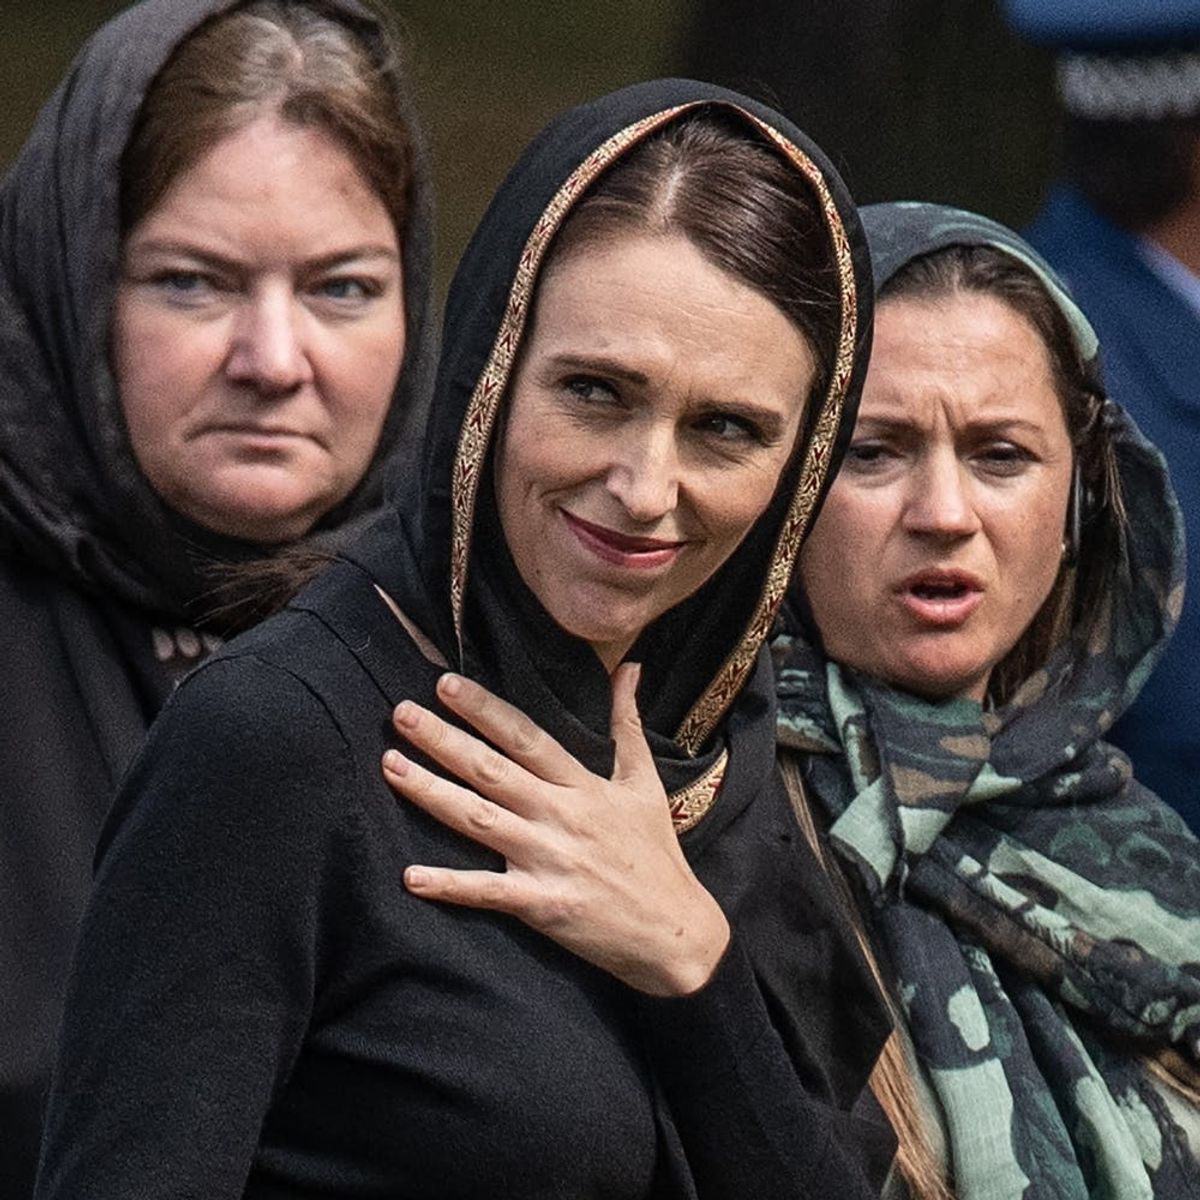 Here’s What Happened When New Zealand Women Wore Headscarves to Support Muslims